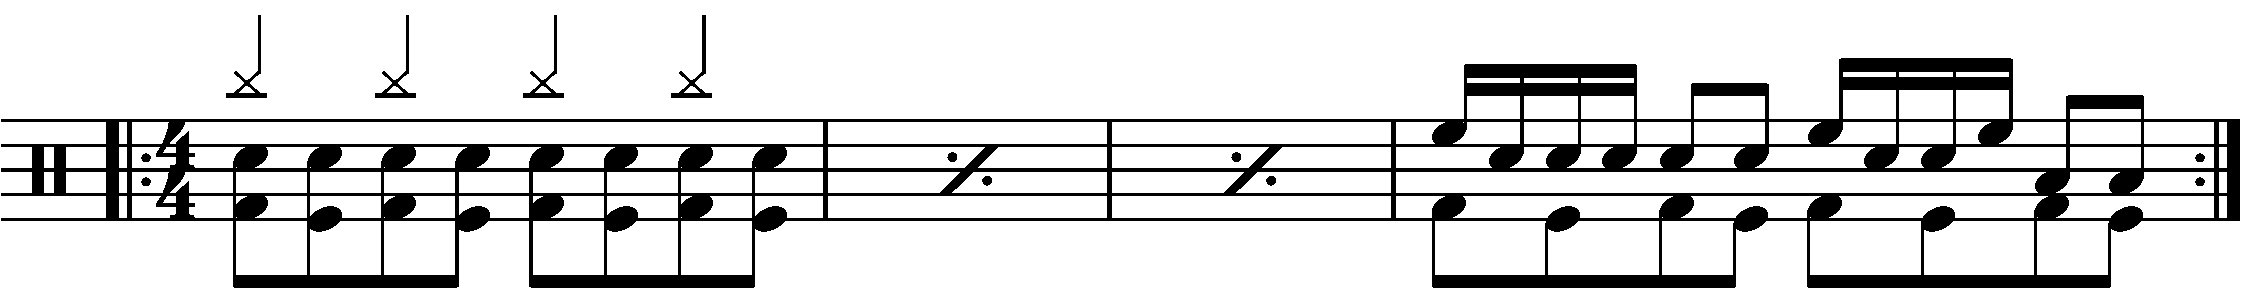 A four bar phrase with constant eighth note blast beats